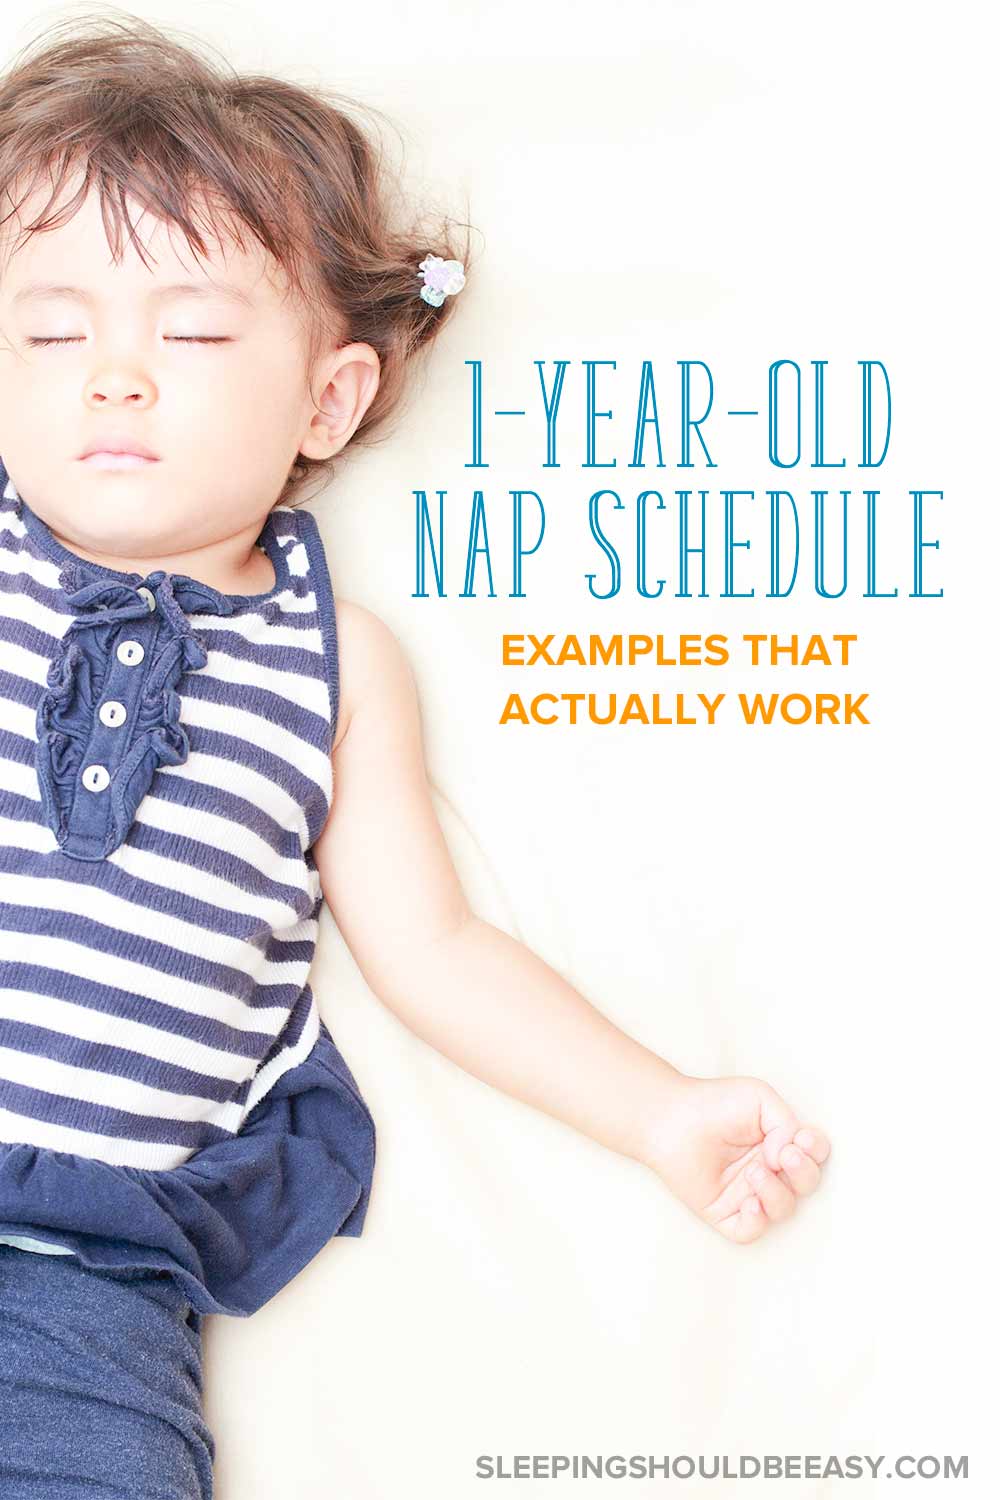 1 year old nap schedule: examples that actually work